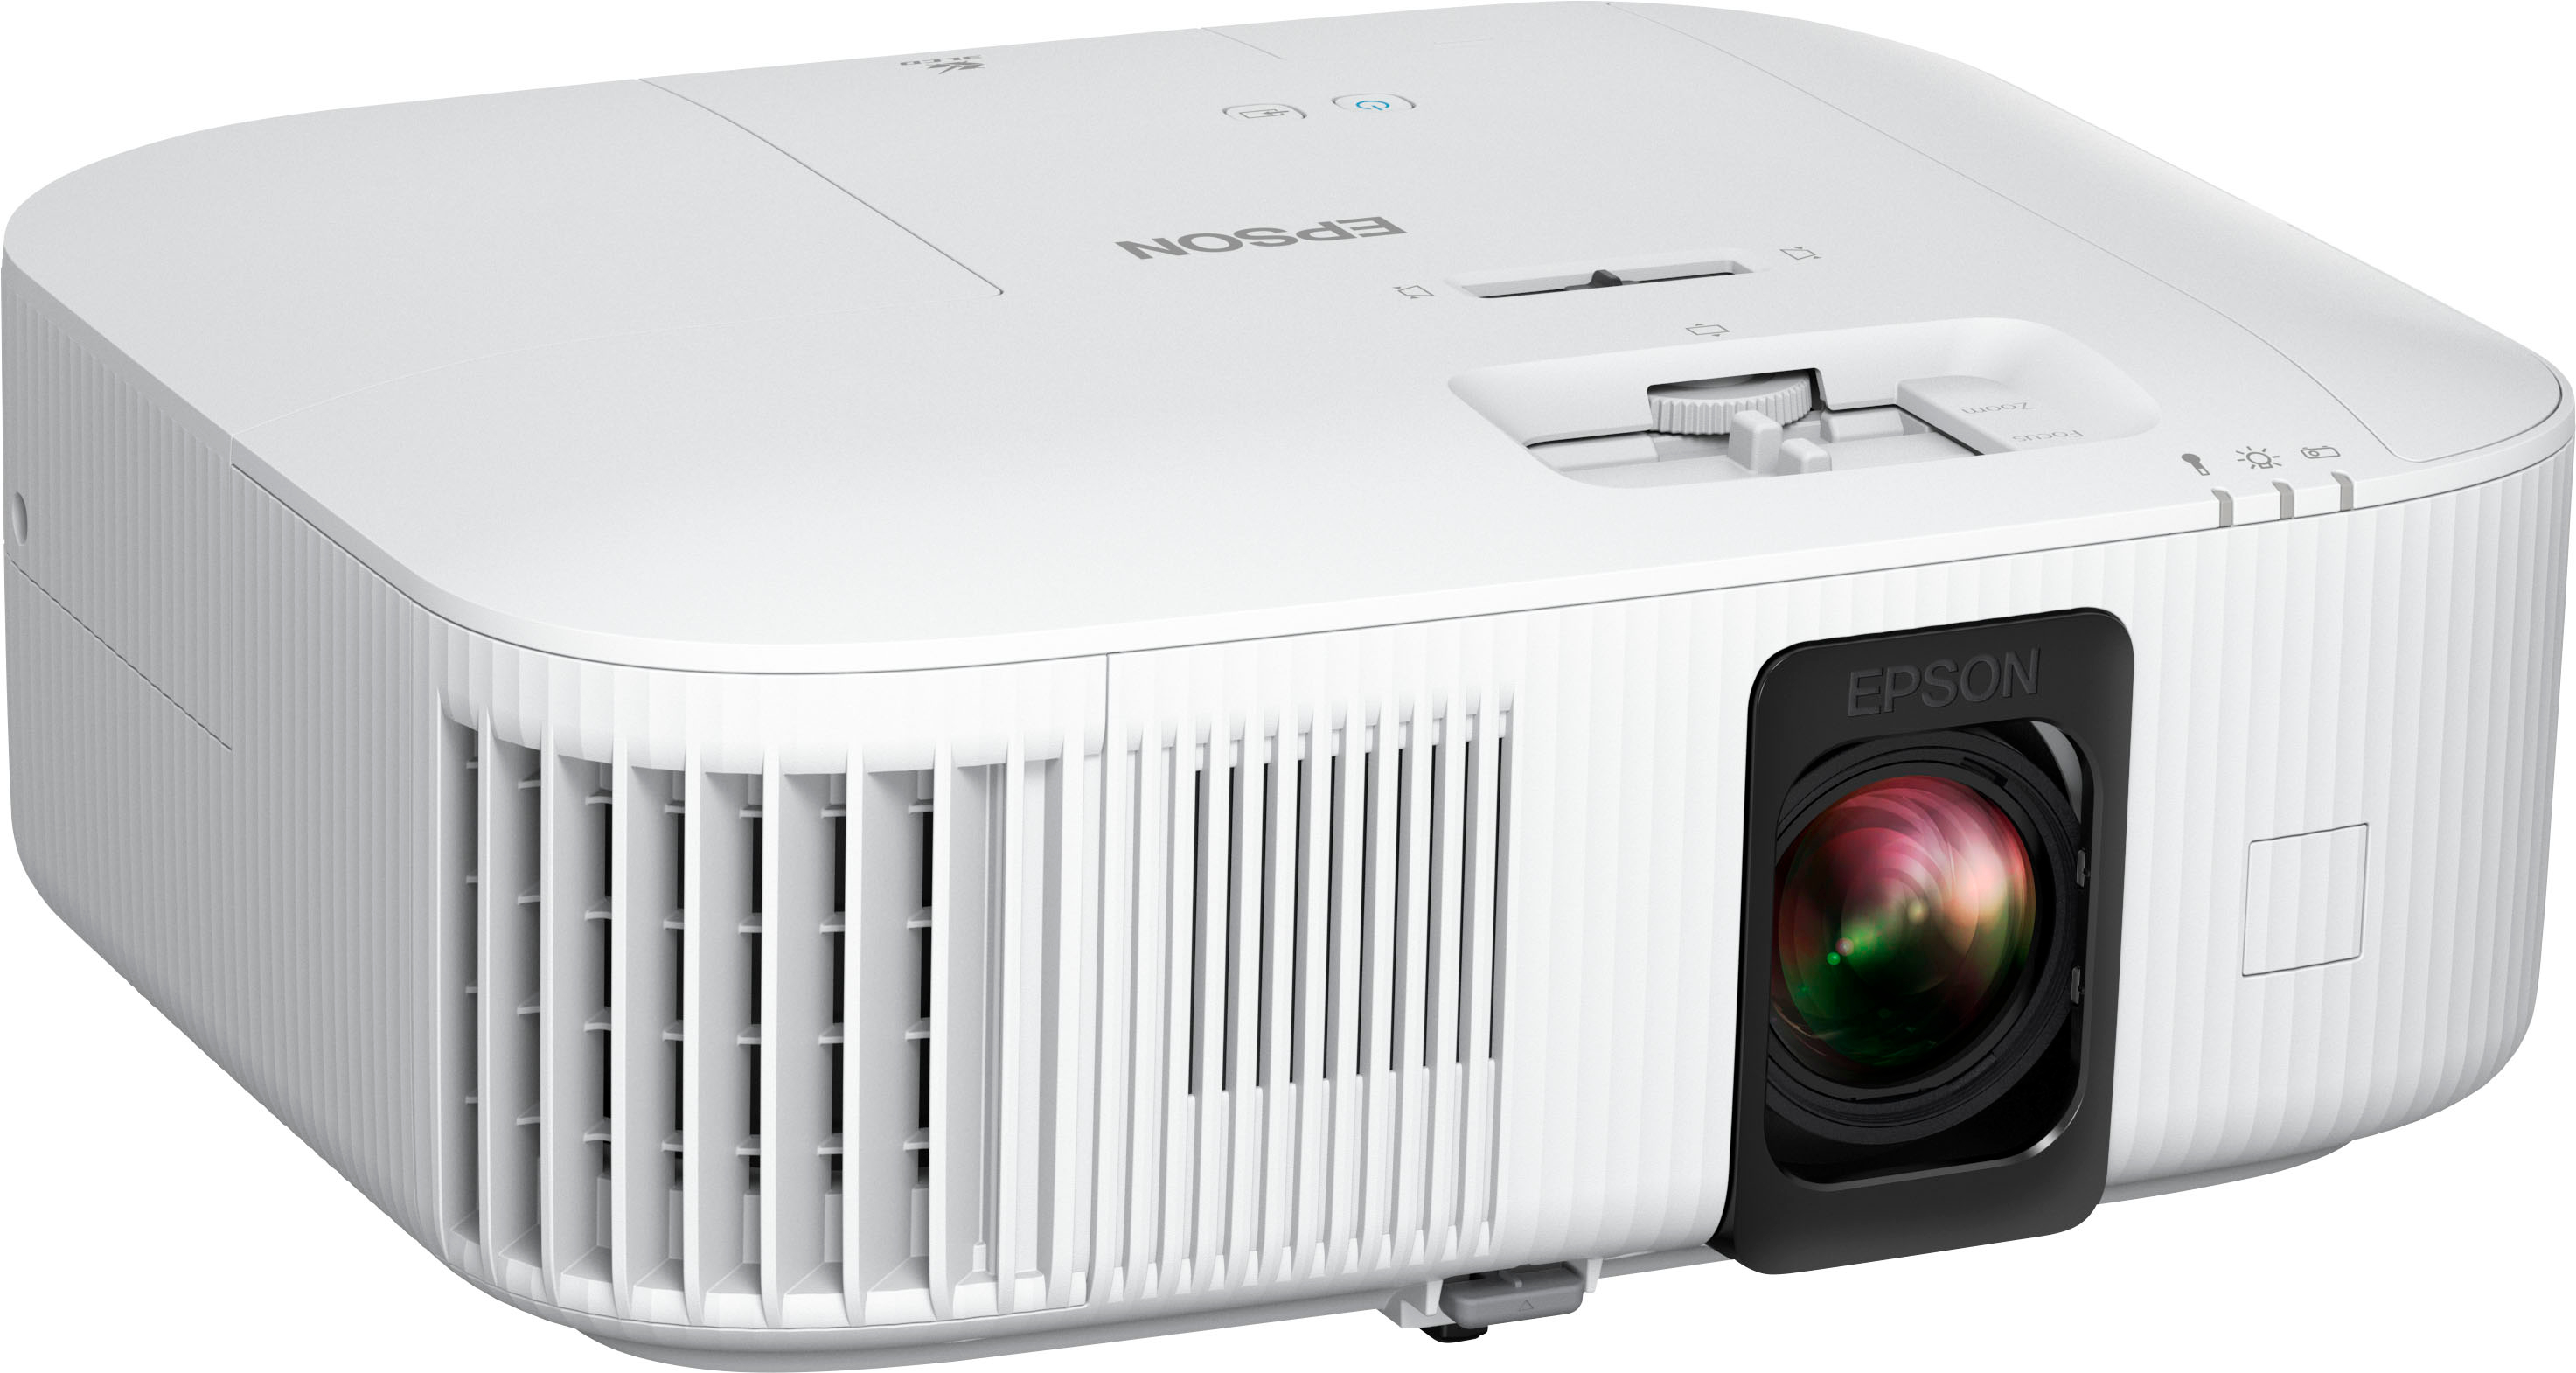 Angle View: Epson - Pro EX9240 3LCD Full HD 1080p Wireless Projector with Miracast - Black